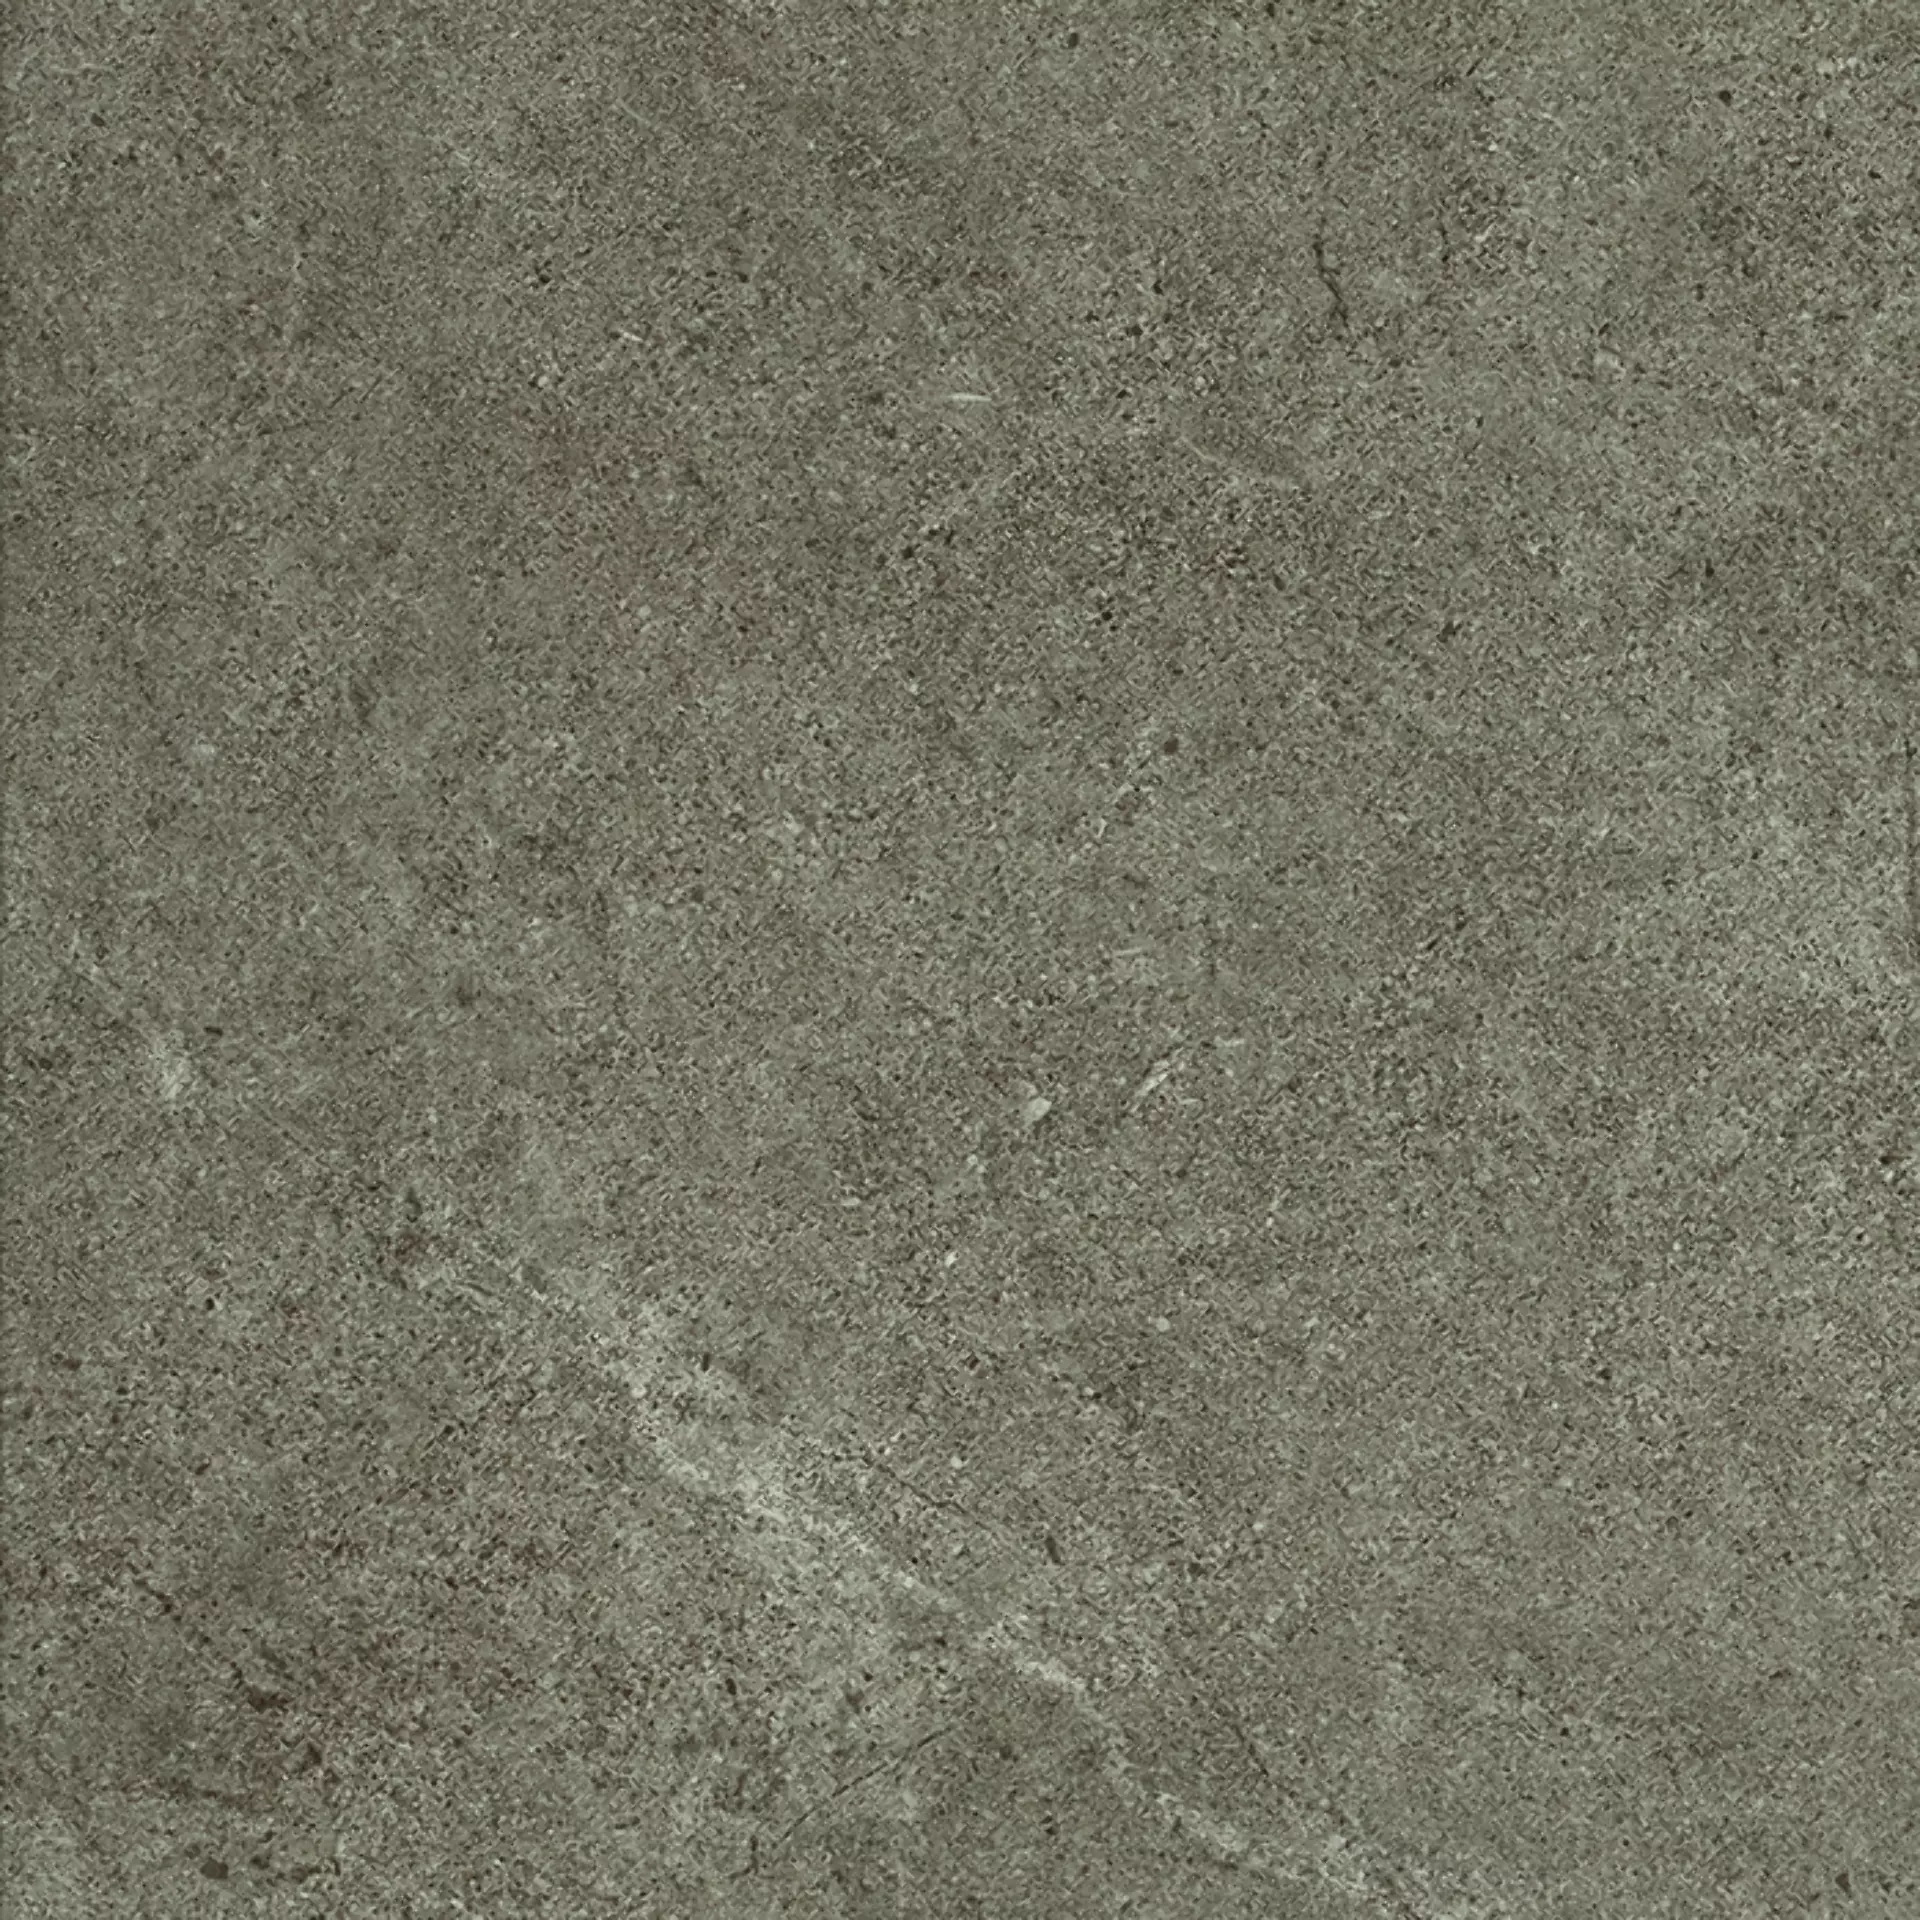 Cercom Archistone Taupe Naturale 1081737 60x60cm rectified 9,5mm